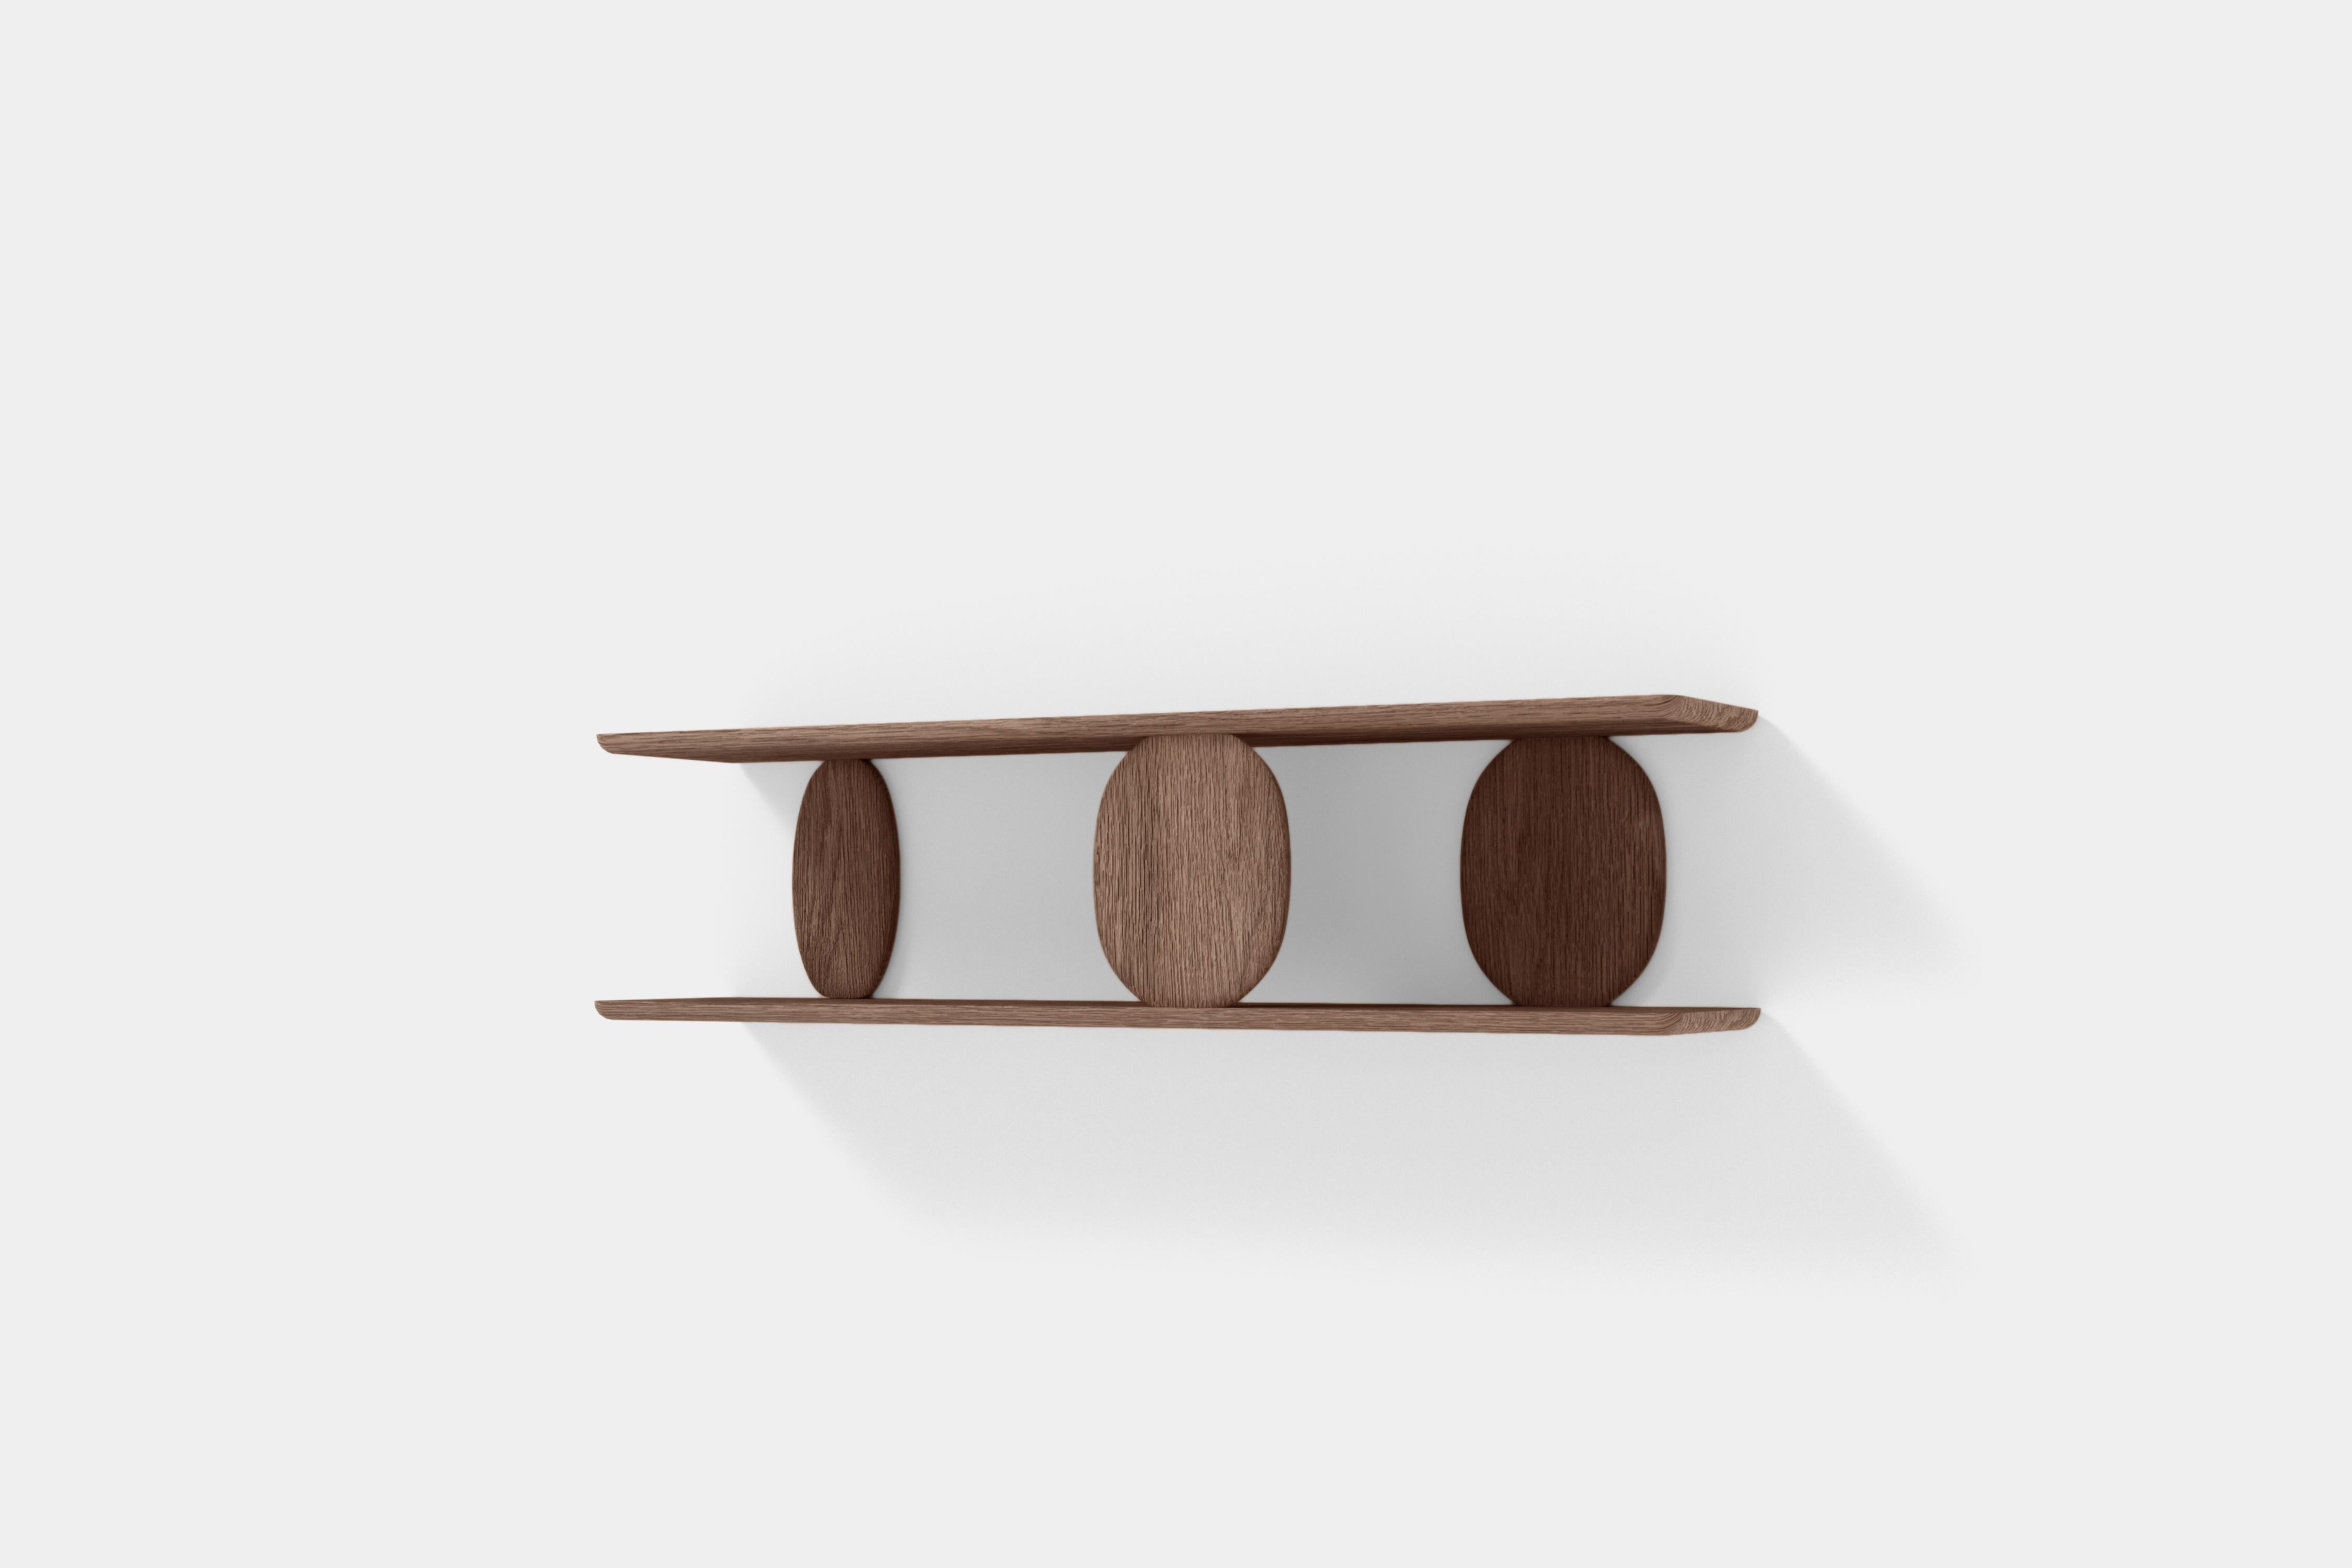 Noviembre XVIII Wall Shelf in Oak Wood, Floating Shelf by Joel Escalona

The Noviembre collection is inspired by the creative values of Constantin Brancusi, a Romanian sculptor considered one of the most influential artists of the twentieth